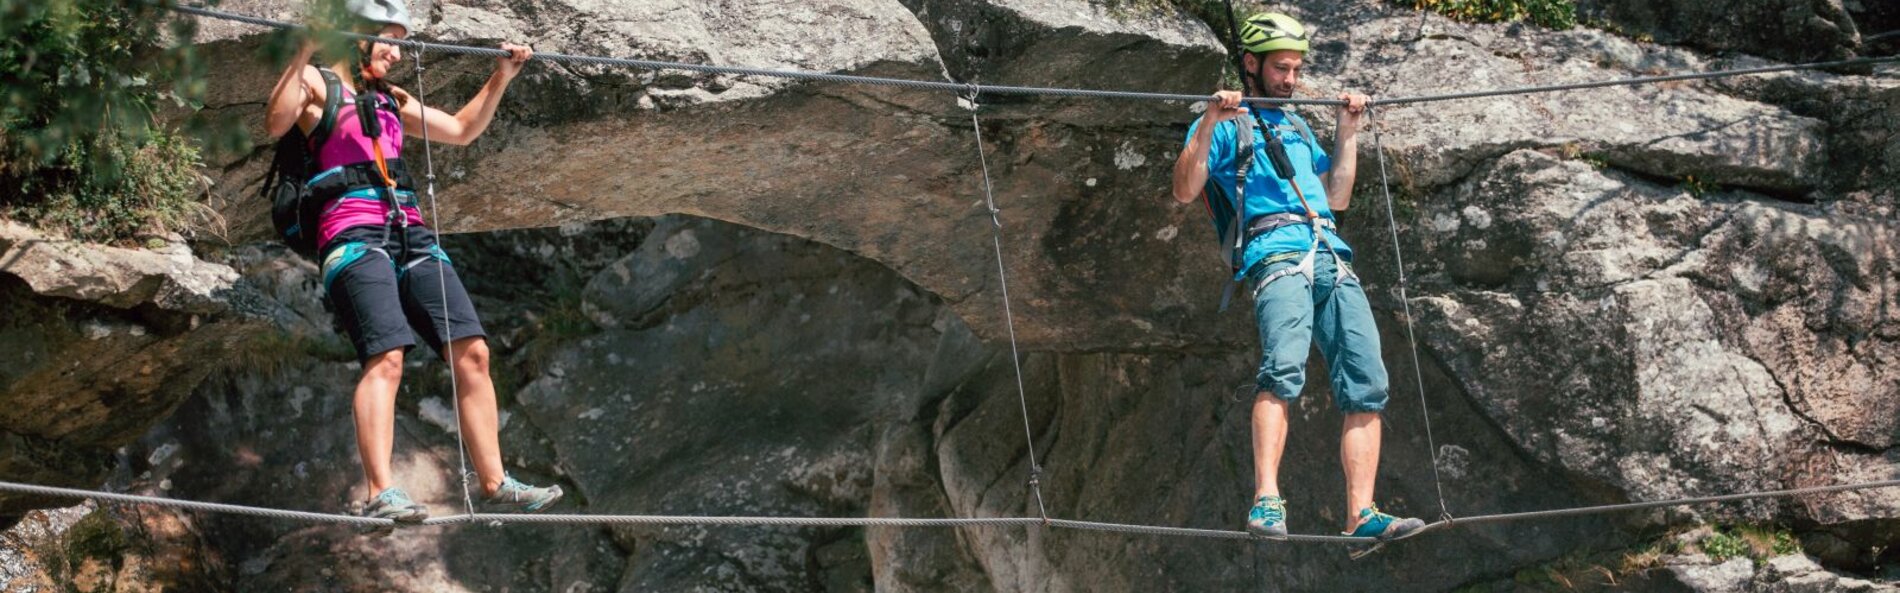 Two climbers are crossing a steel rope bridge. A rock face can be seen in the background.